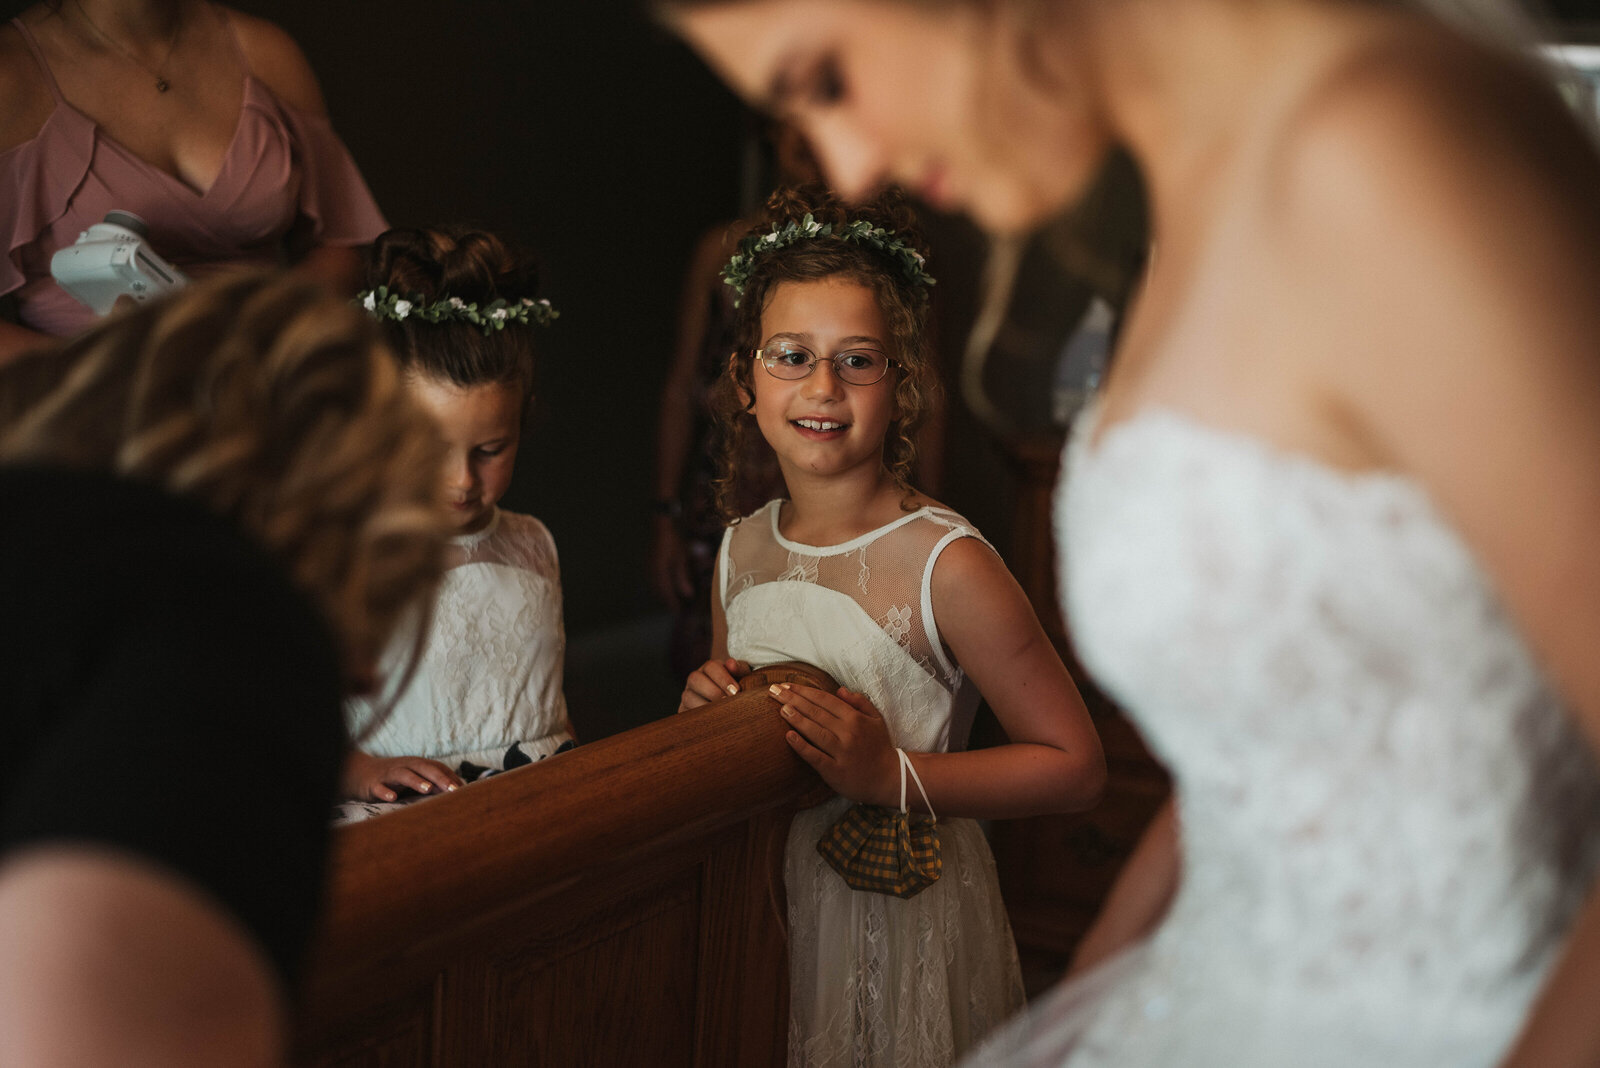 Flower girl admires bride as she gets ready for her wedding.